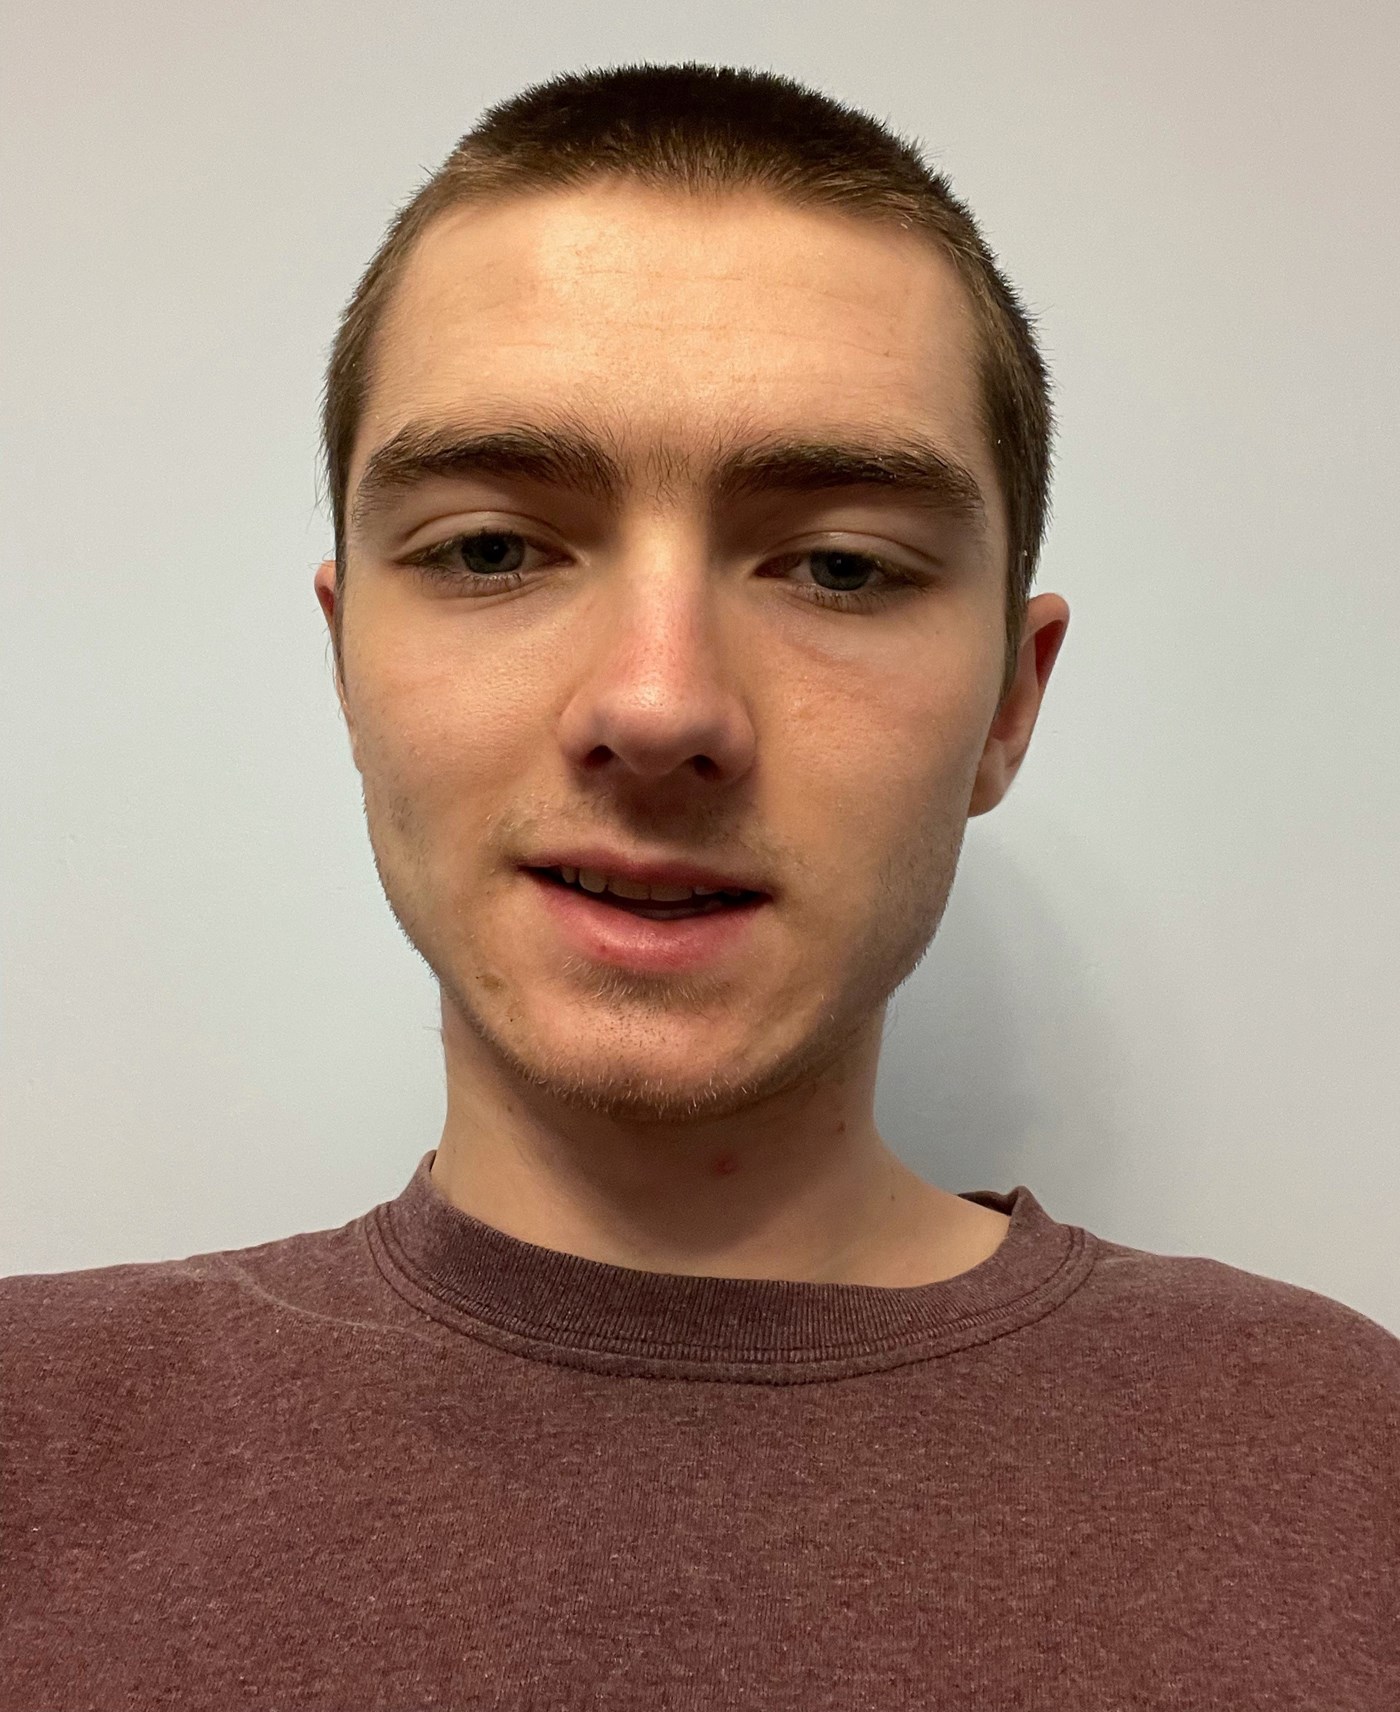 Tobias Proctor-Goddard is a B.A. student in Psychology at UMass Lowell and member of the Center for Autism Research and Education (CARE) Affiliates group.